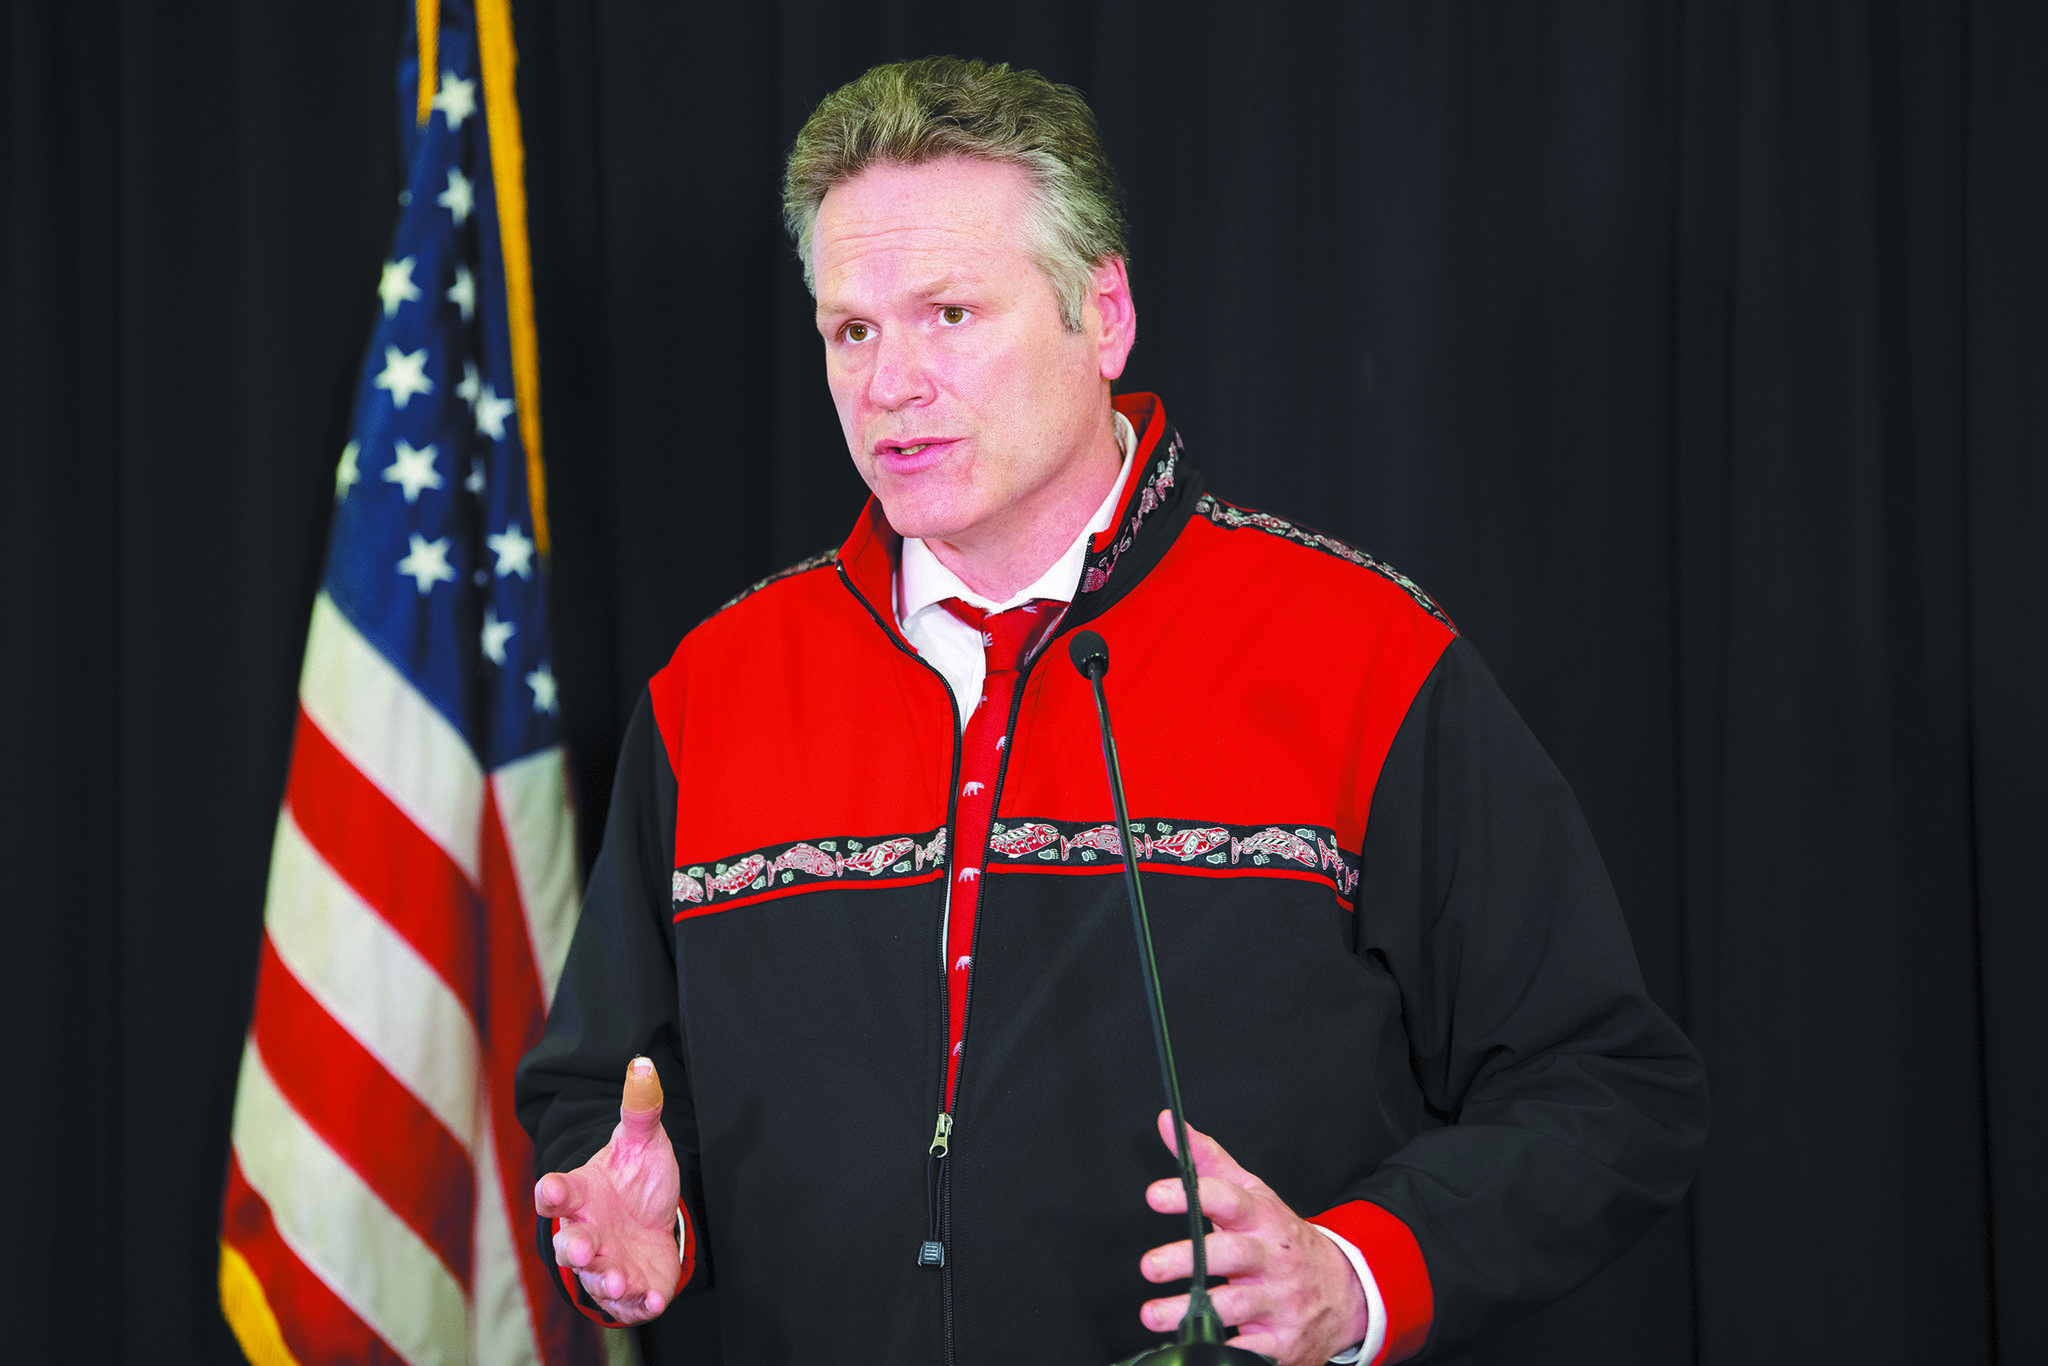 Gov. Mike Dunleavy speaks during a Tuesday, April 14, 2020 press conference in the Atwood Building in Anchorage, Alaska. (Photo courtesy Office of the Governor)